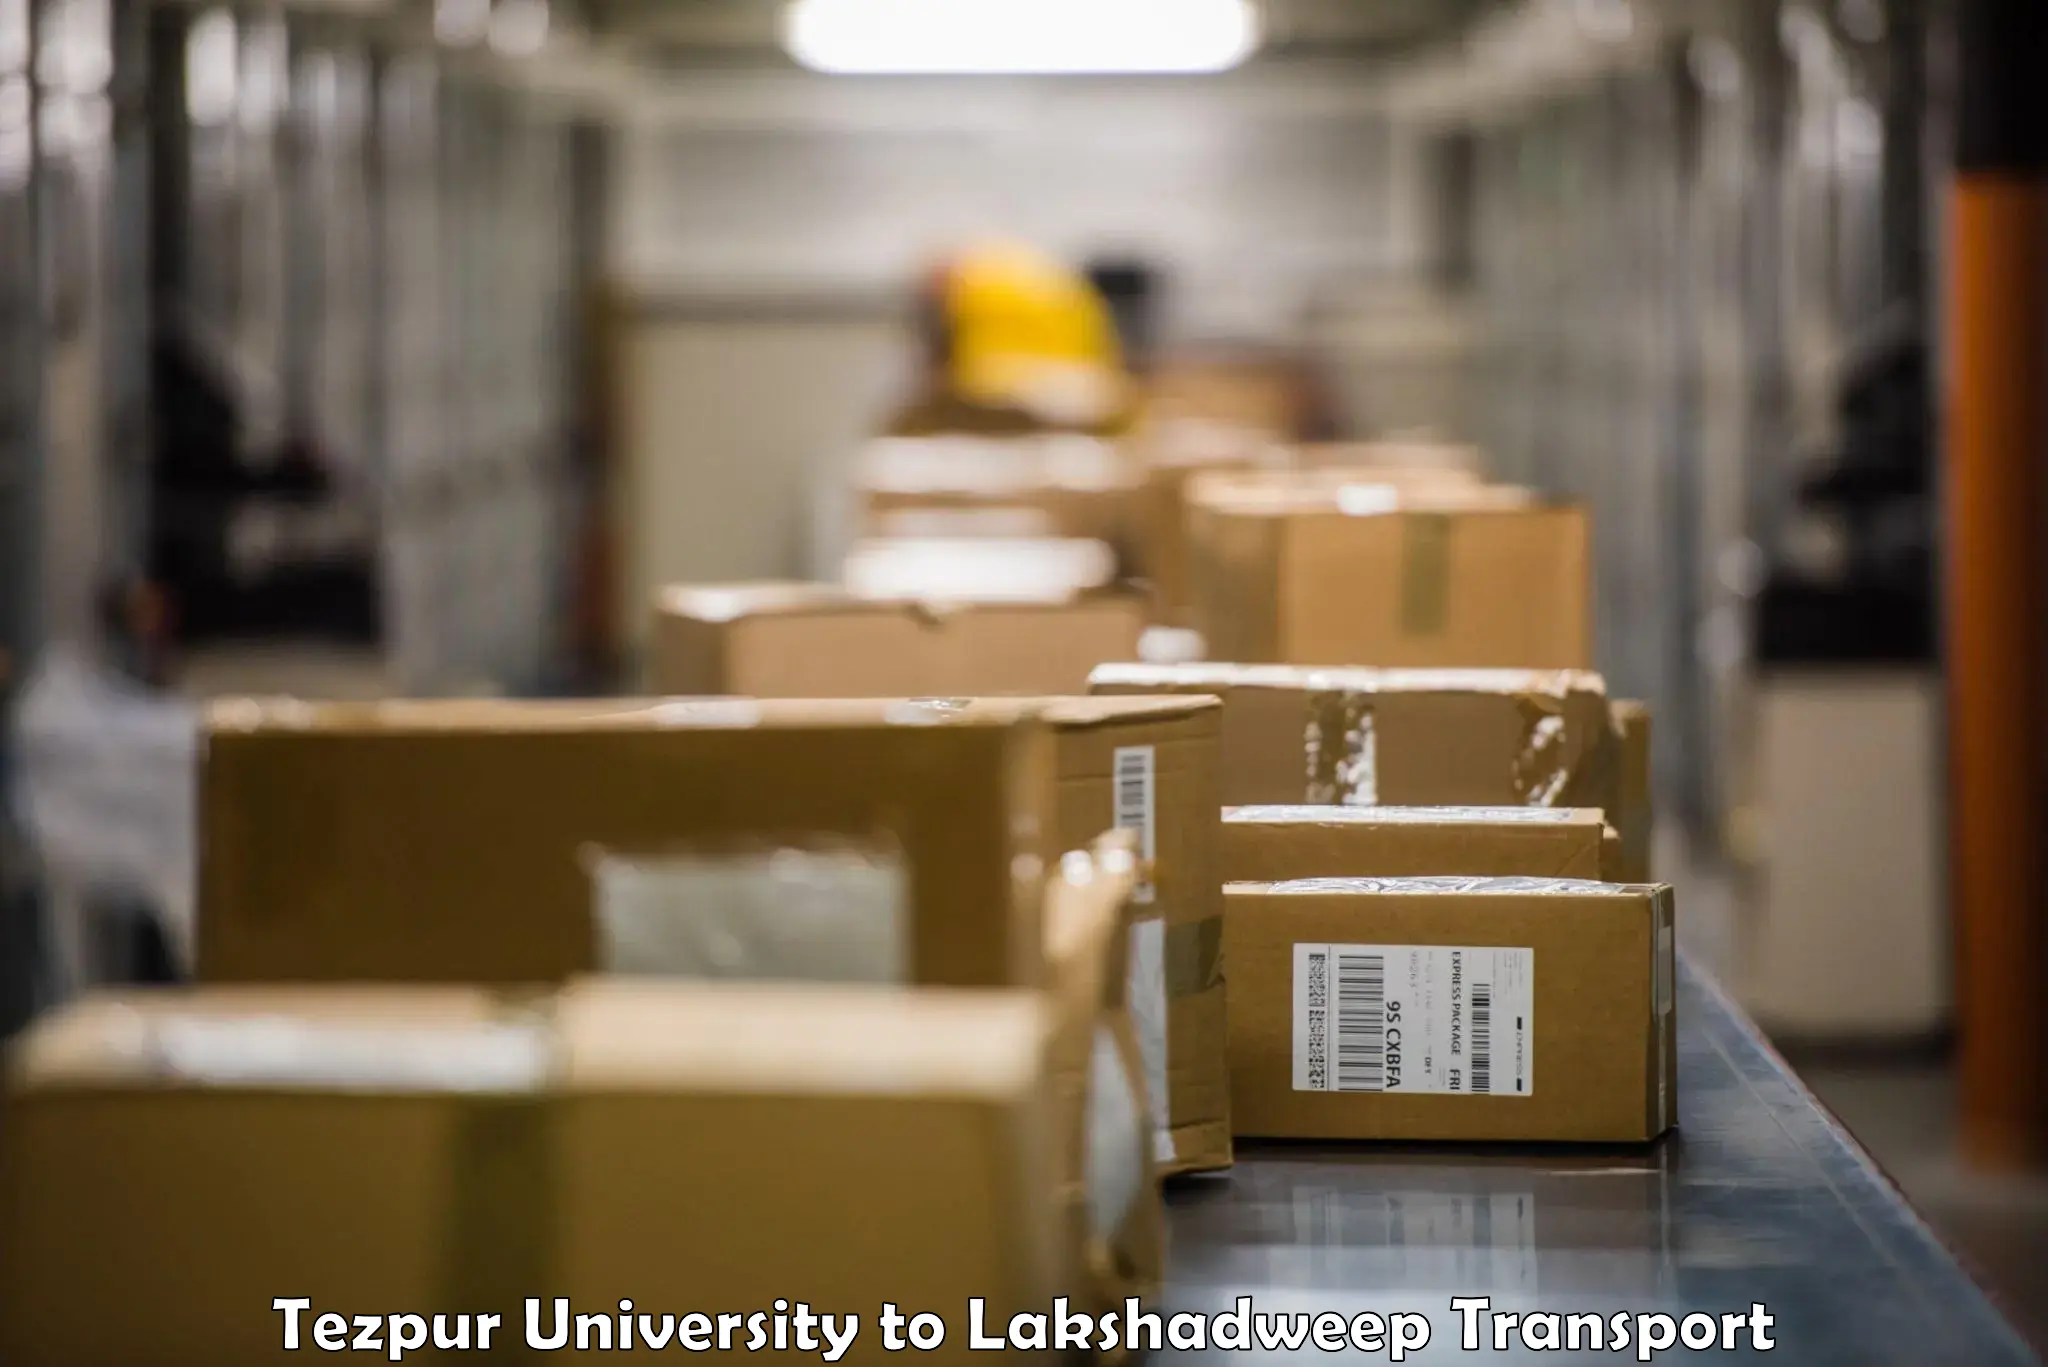 Container transportation services Tezpur University to Lakshadweep